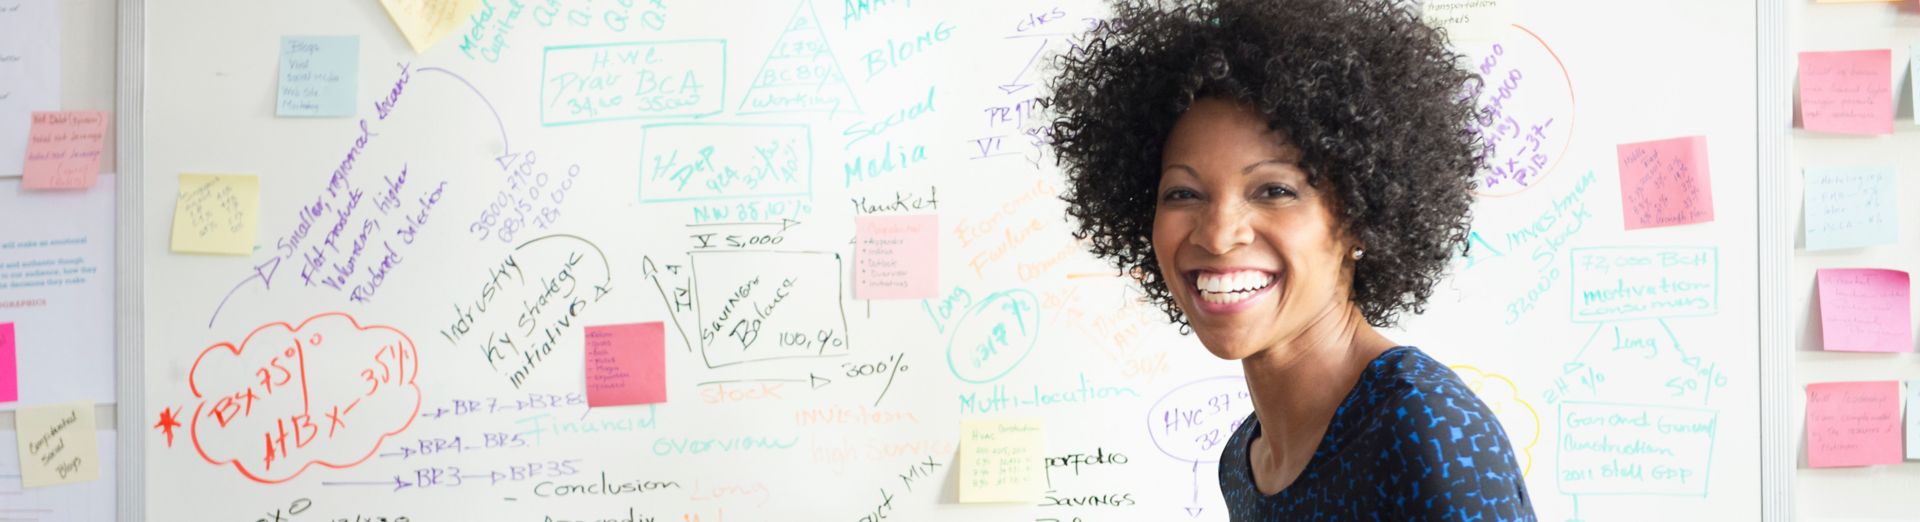 Woman smiling with whiteboard behind her